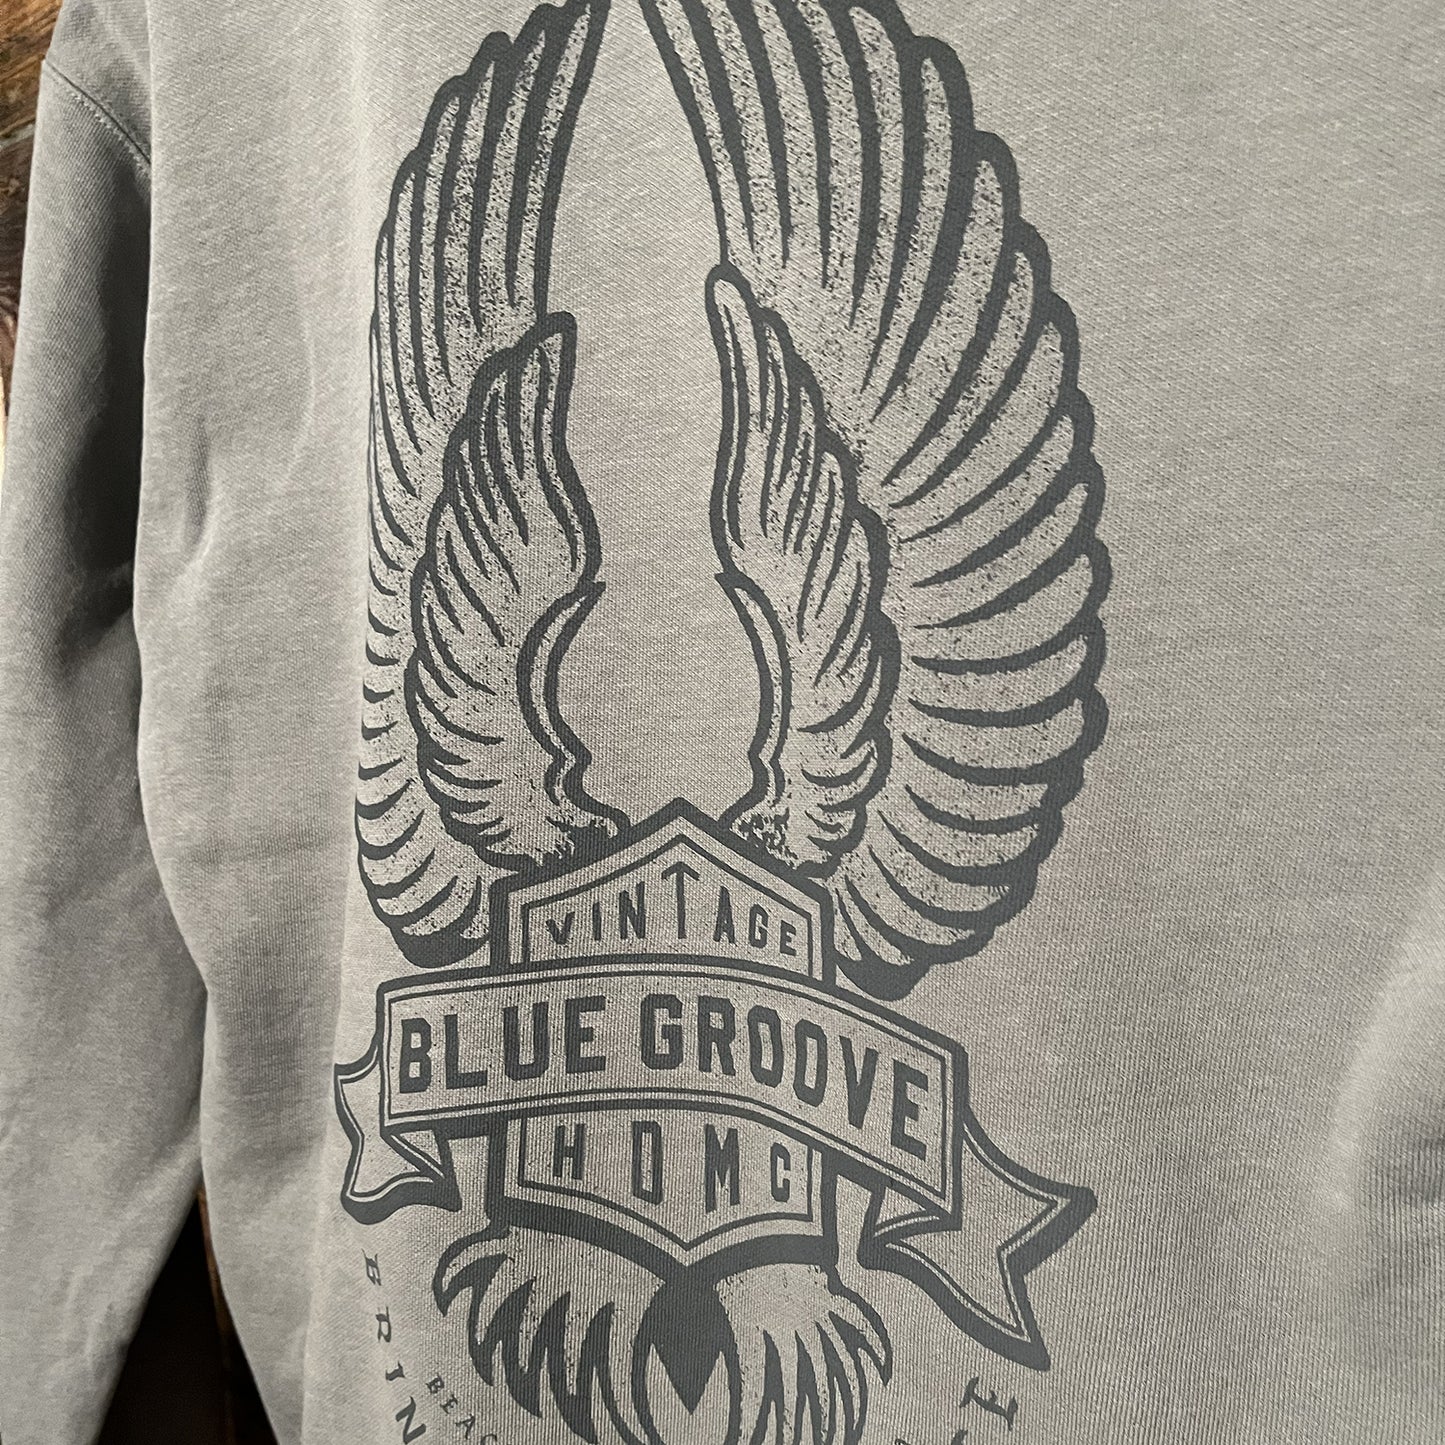 “BRING ‘EM BACK TO LIFE” PULL-OVER HOODIE - WORN GRAY